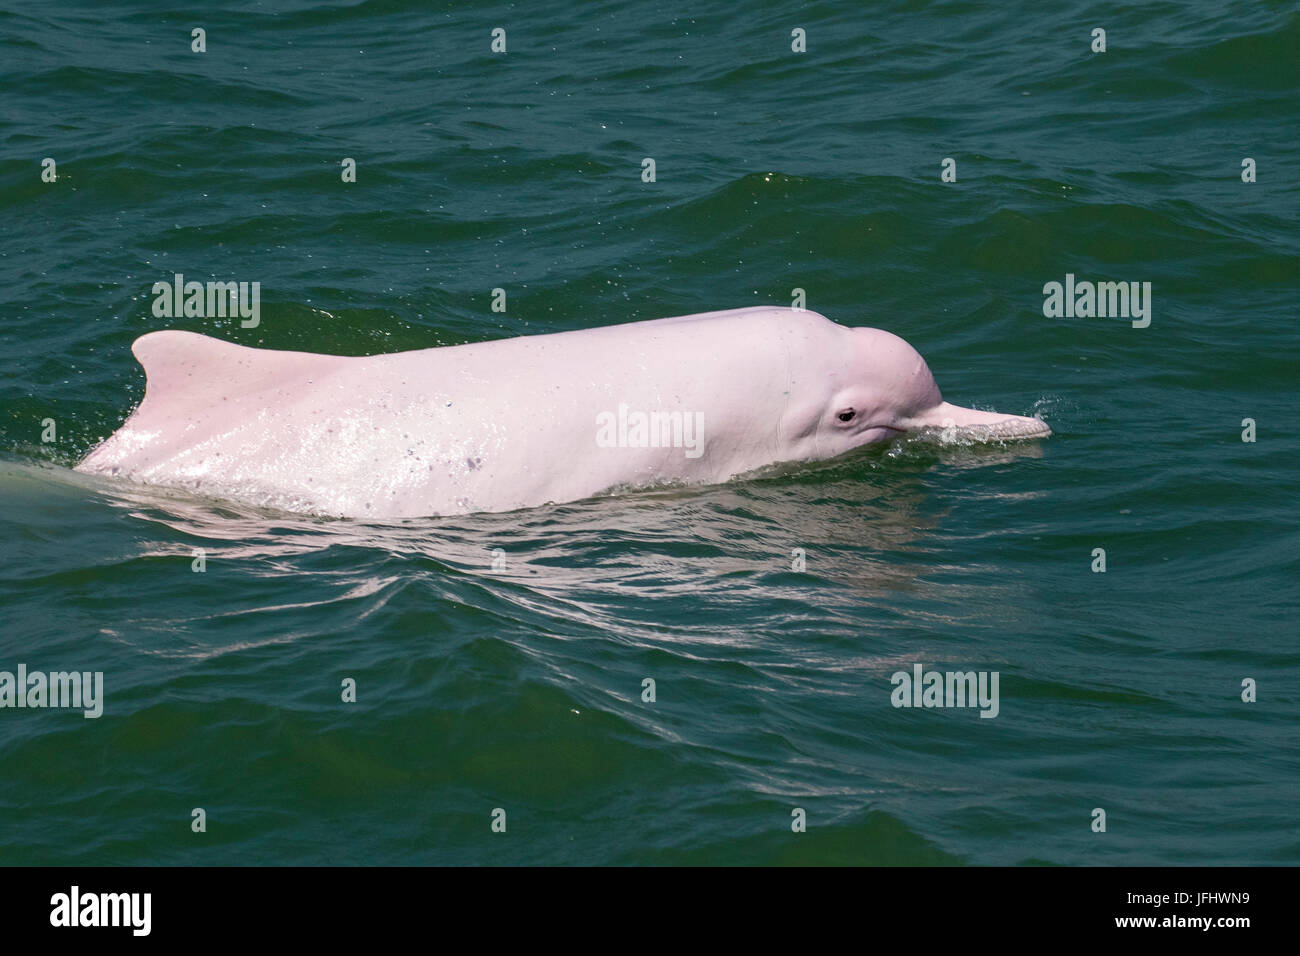 An adult Indo-Pacific Humpback Dolphin (Sousa chinensis) surfacing in Hong Kong waters. This coastal species faces many threats from humans. Stock Photo